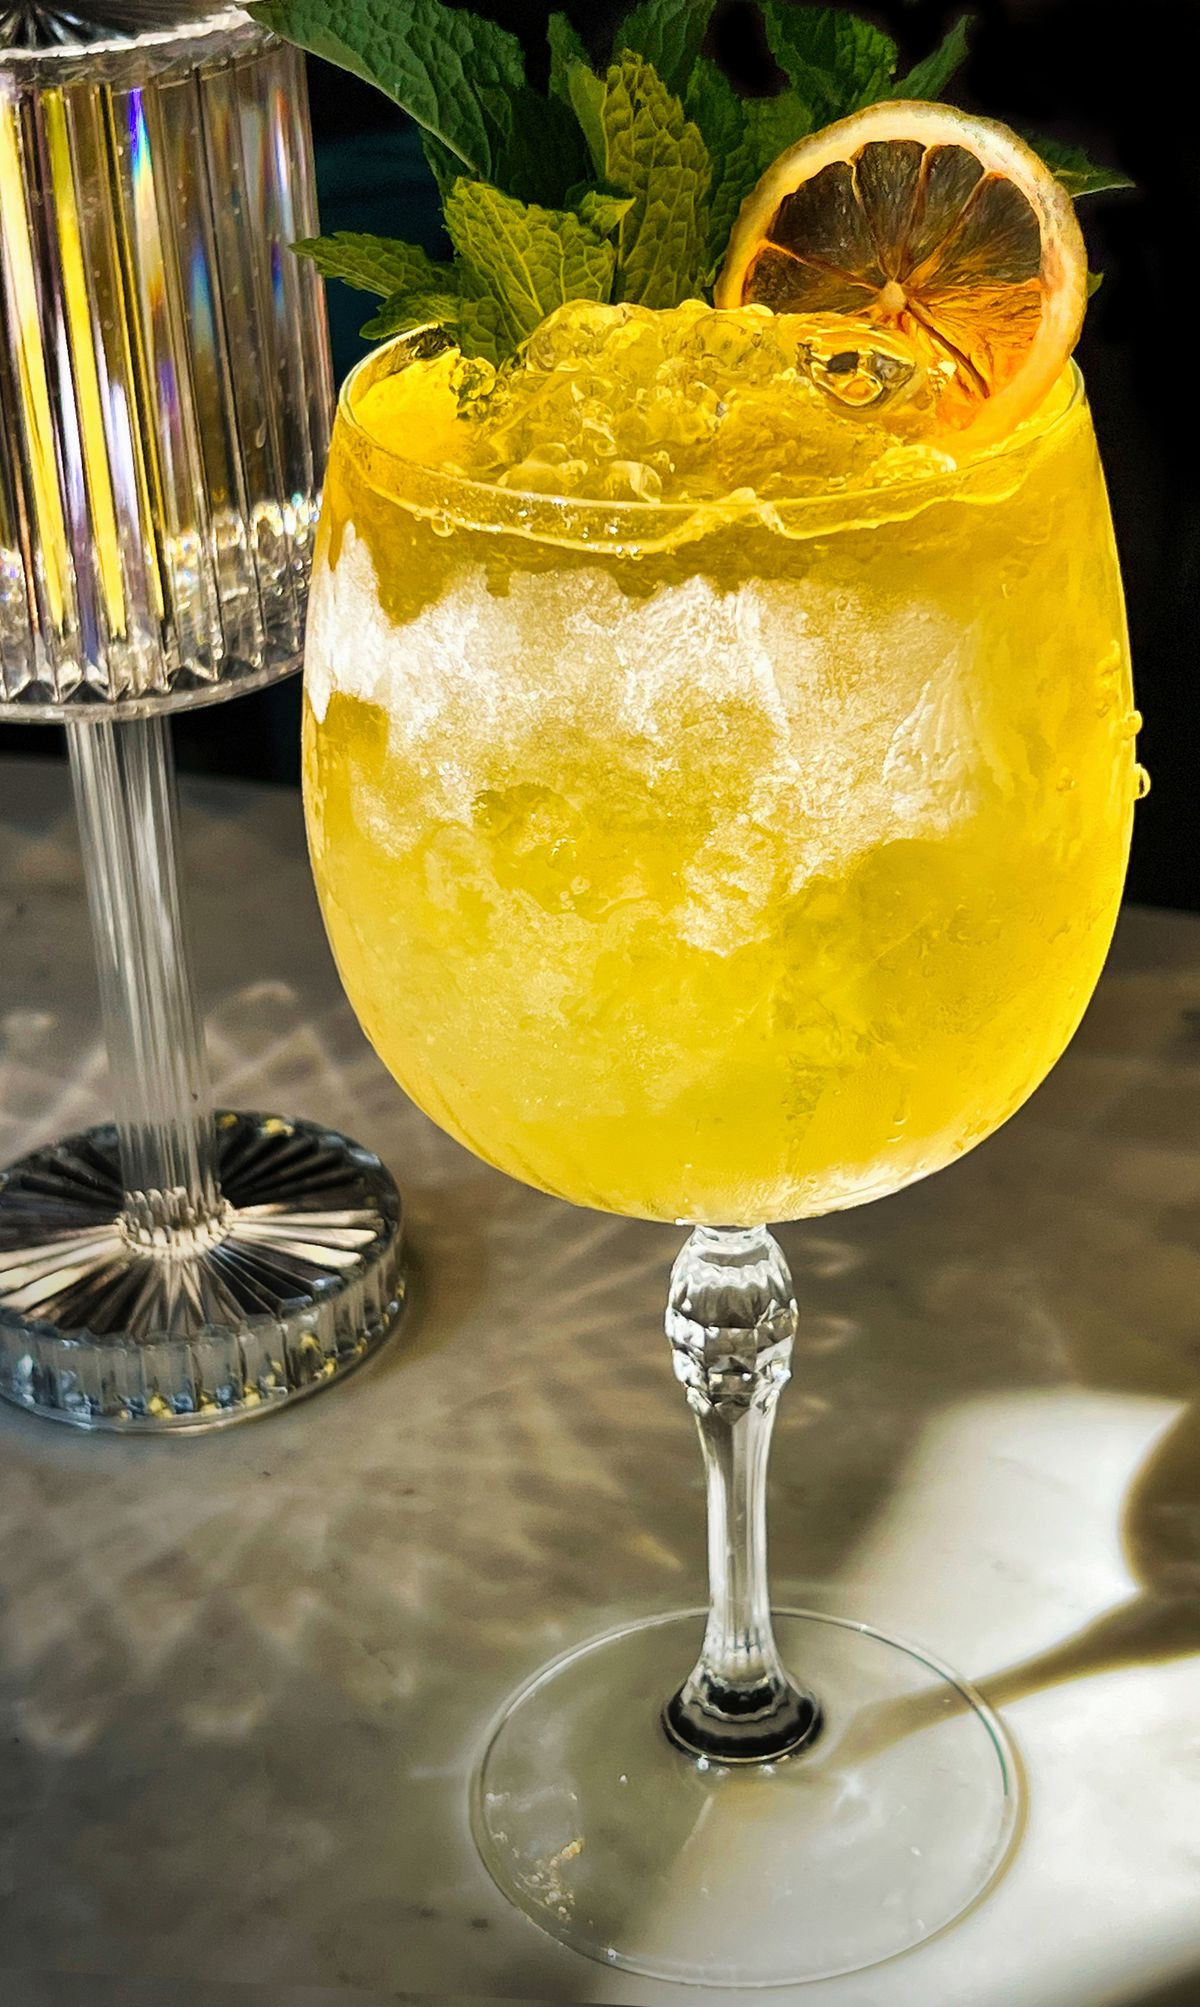 A wine glass filled to the brim with a yellow liquid and ice with a orange slice as a garnish.